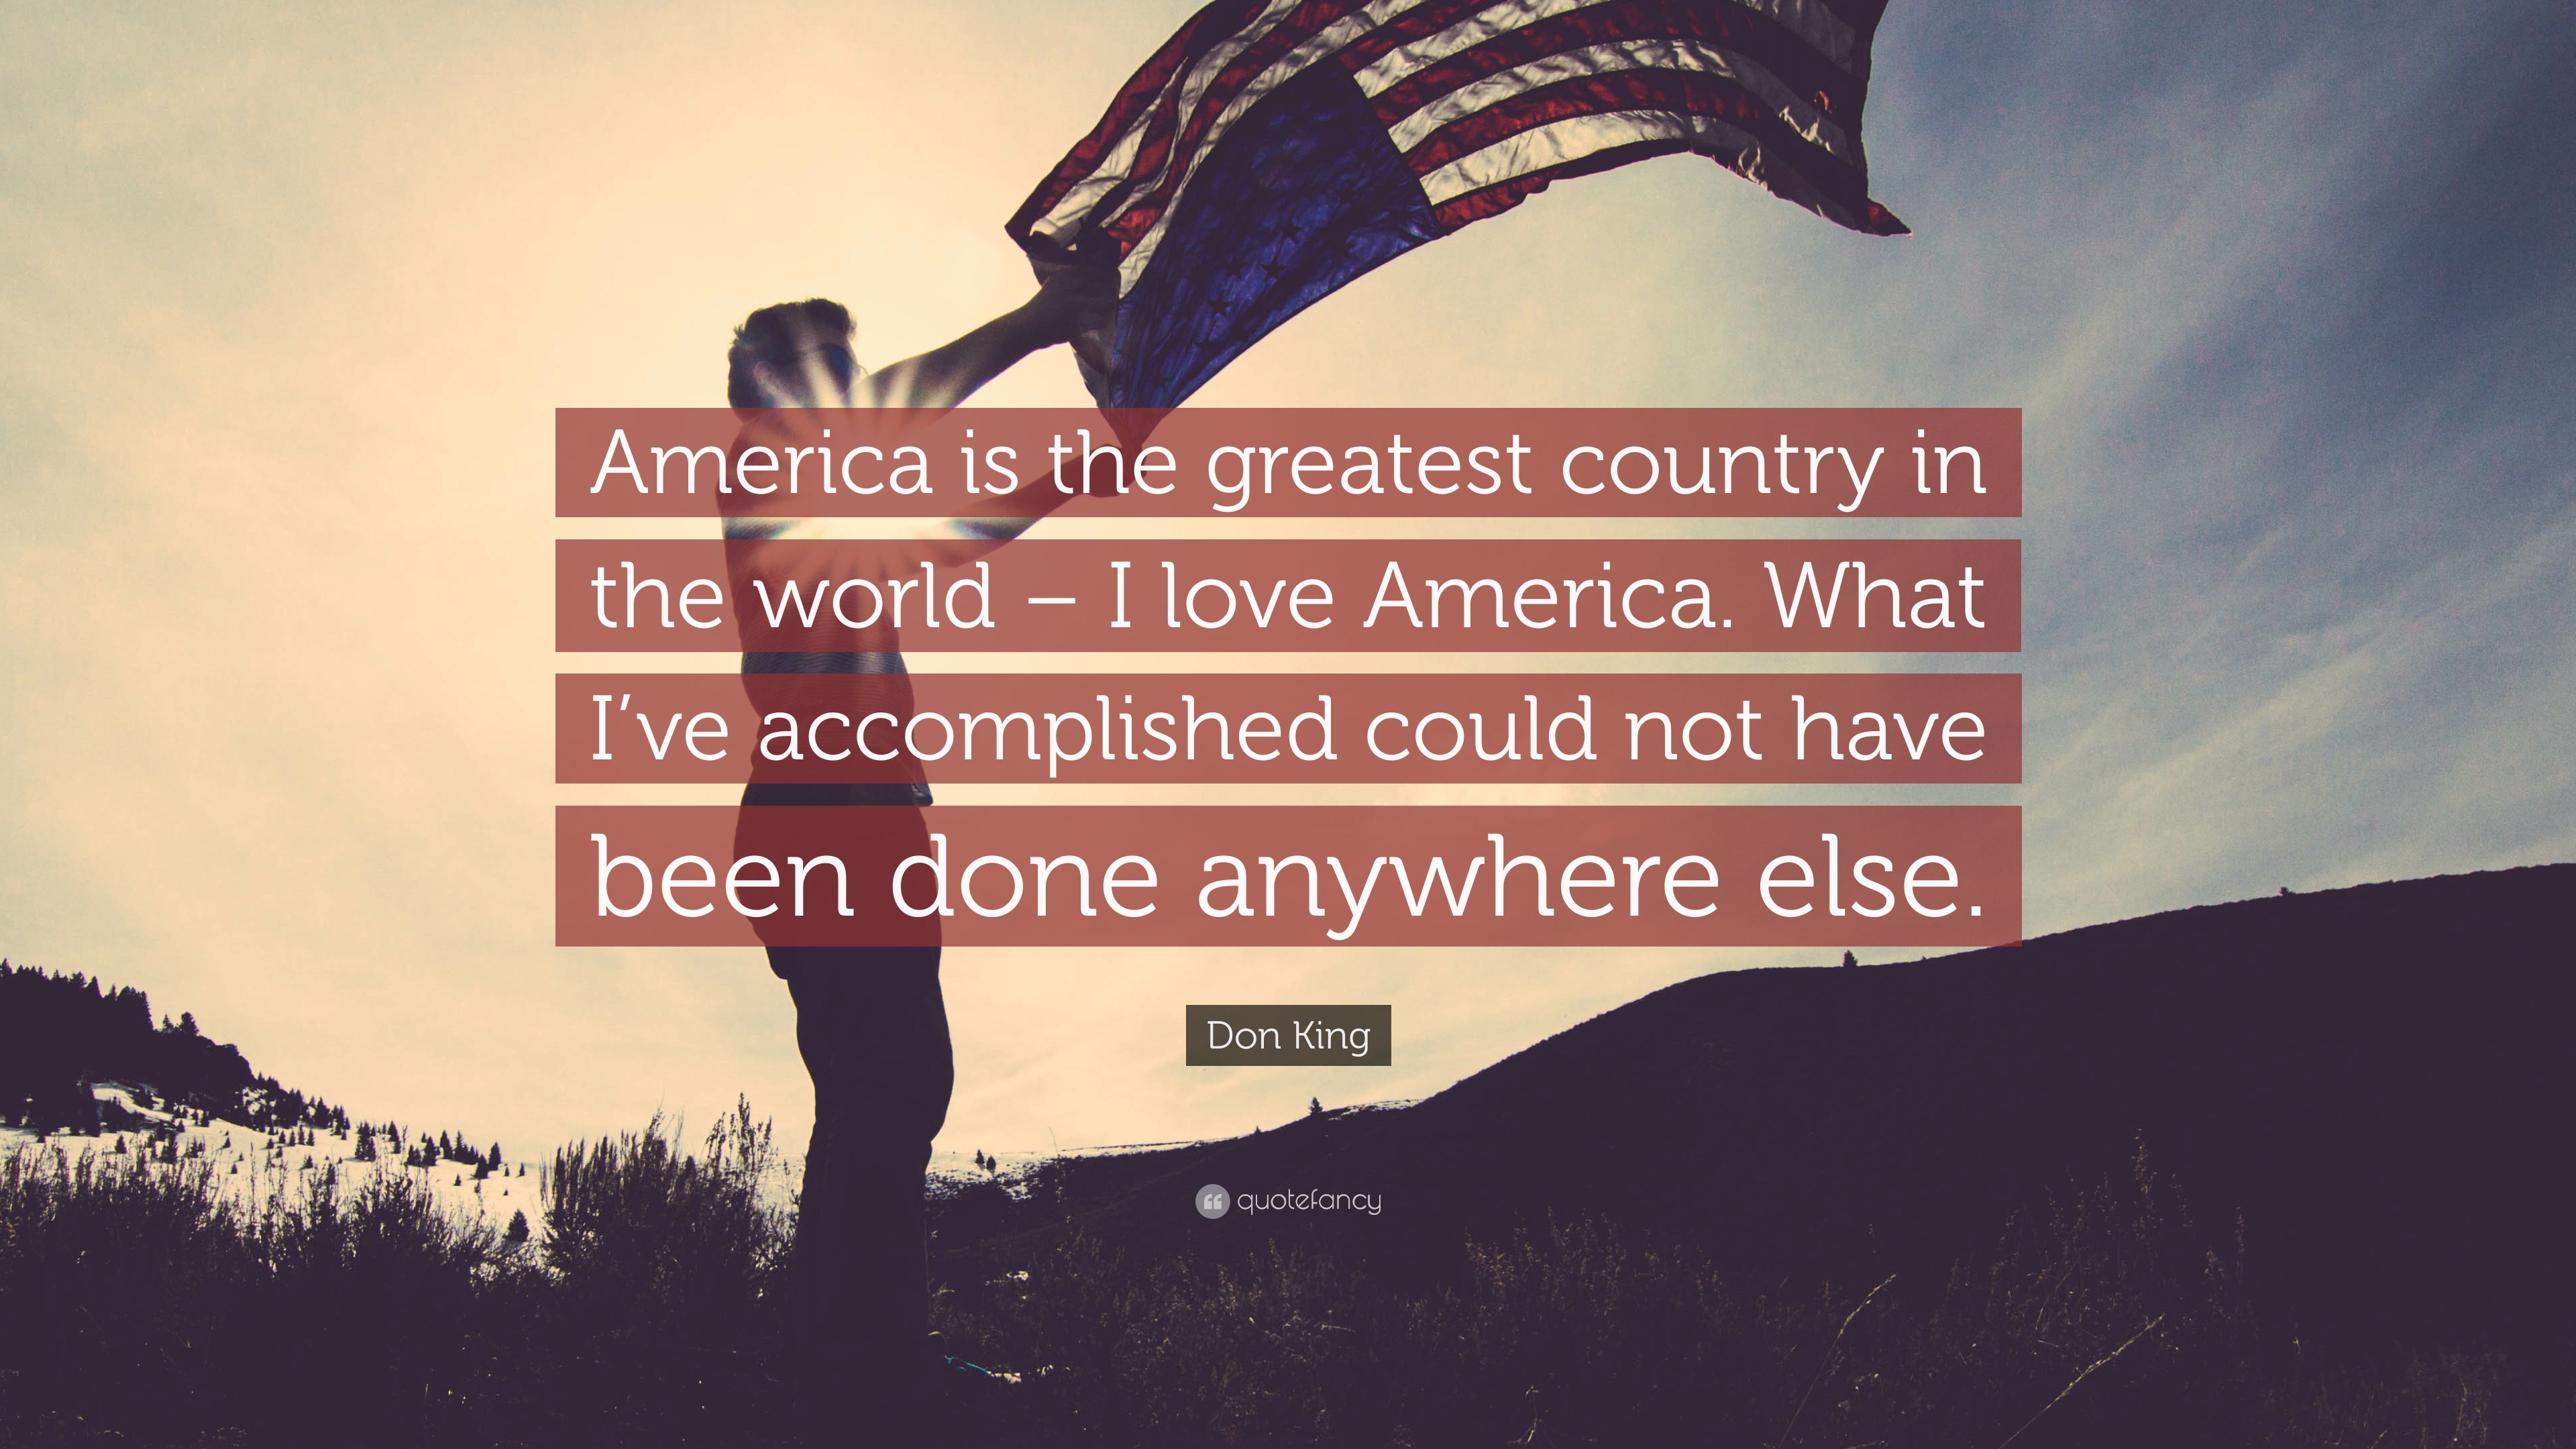 Are we the greatest country in the world?